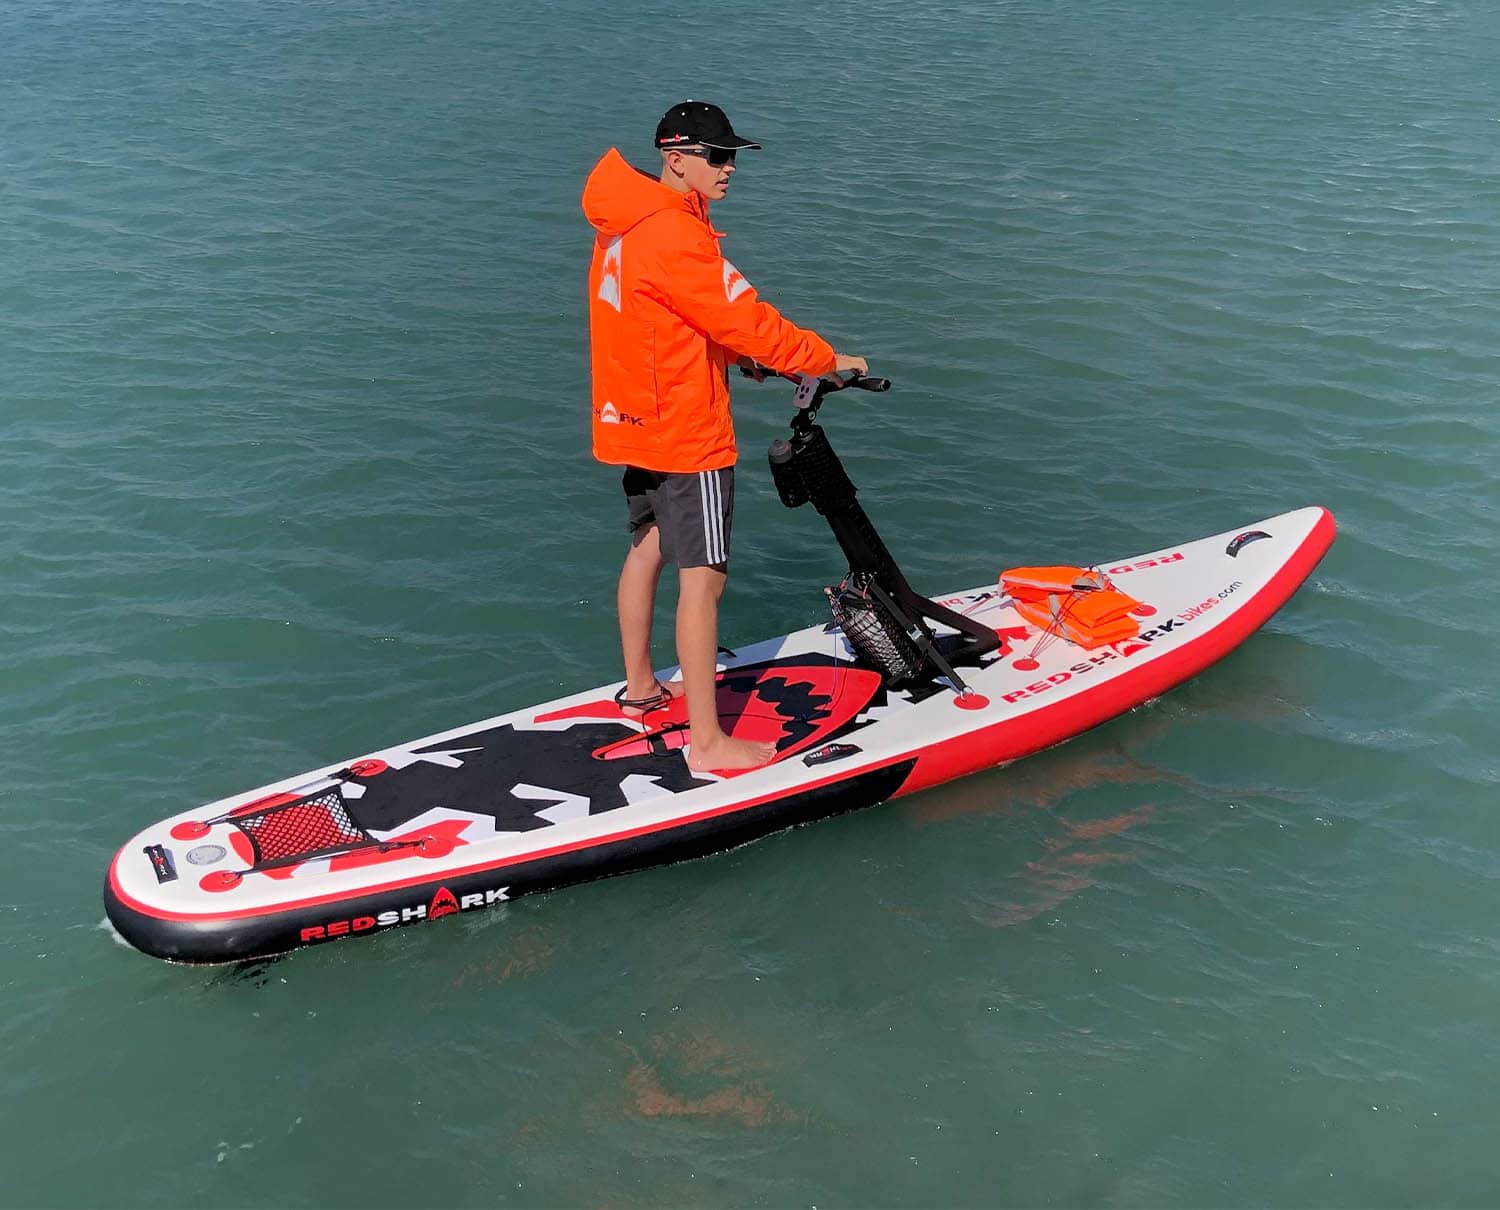 Red Shark Bikes Canada, fishing, paddle board, inflatable, water